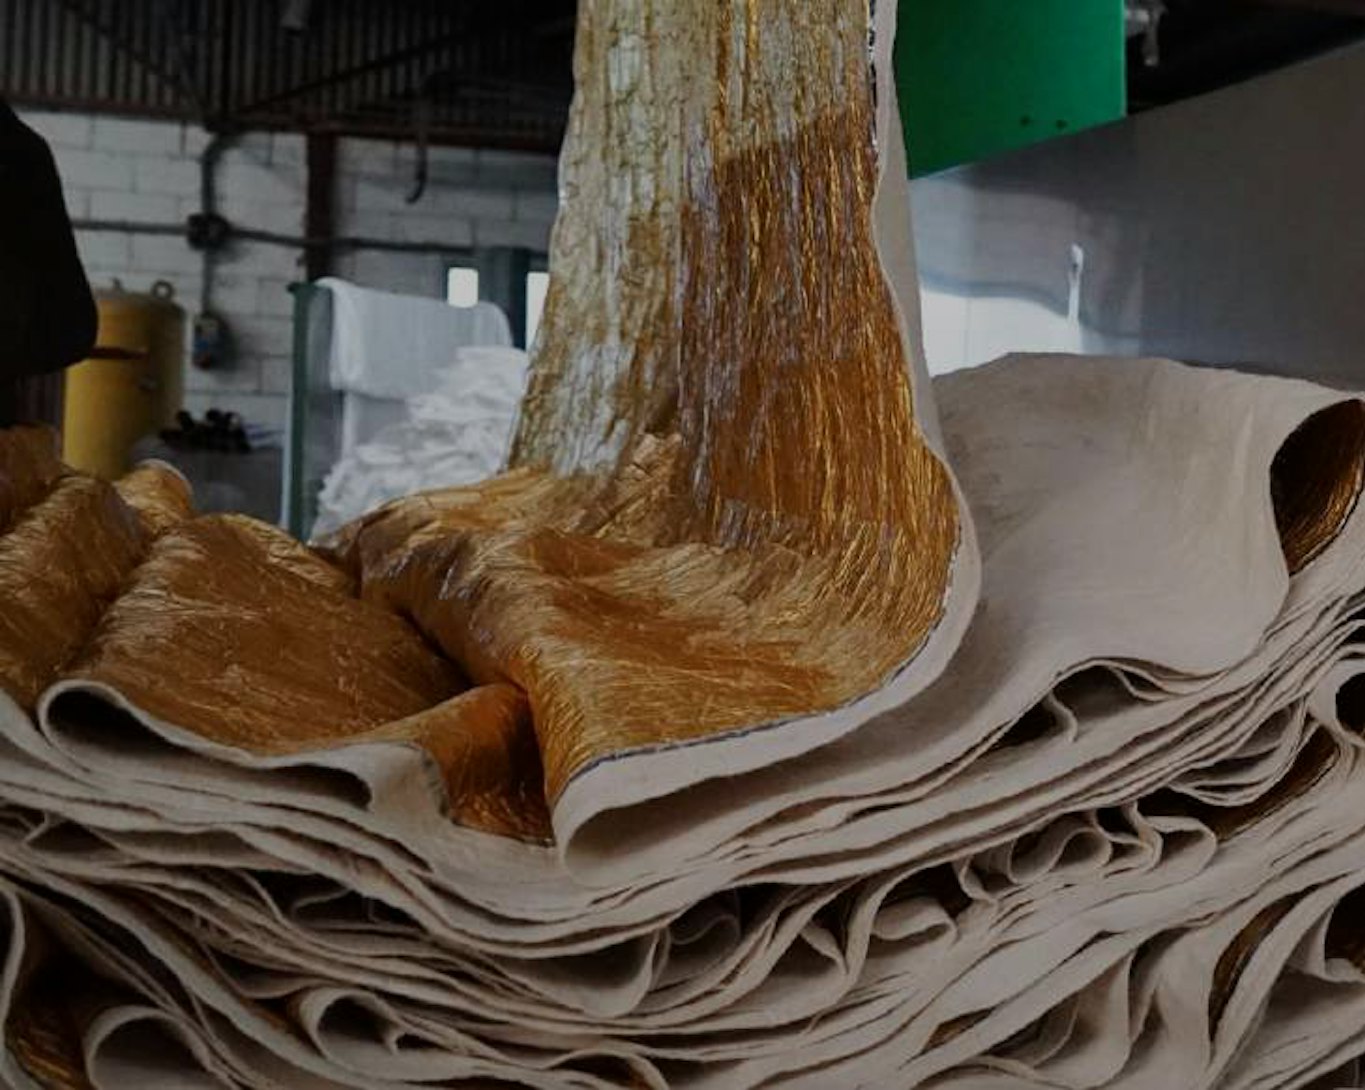 This Mushroom-Based Leather Could Be the Next Sustainable Fashion Material,  Smart News, Vegan Leather 